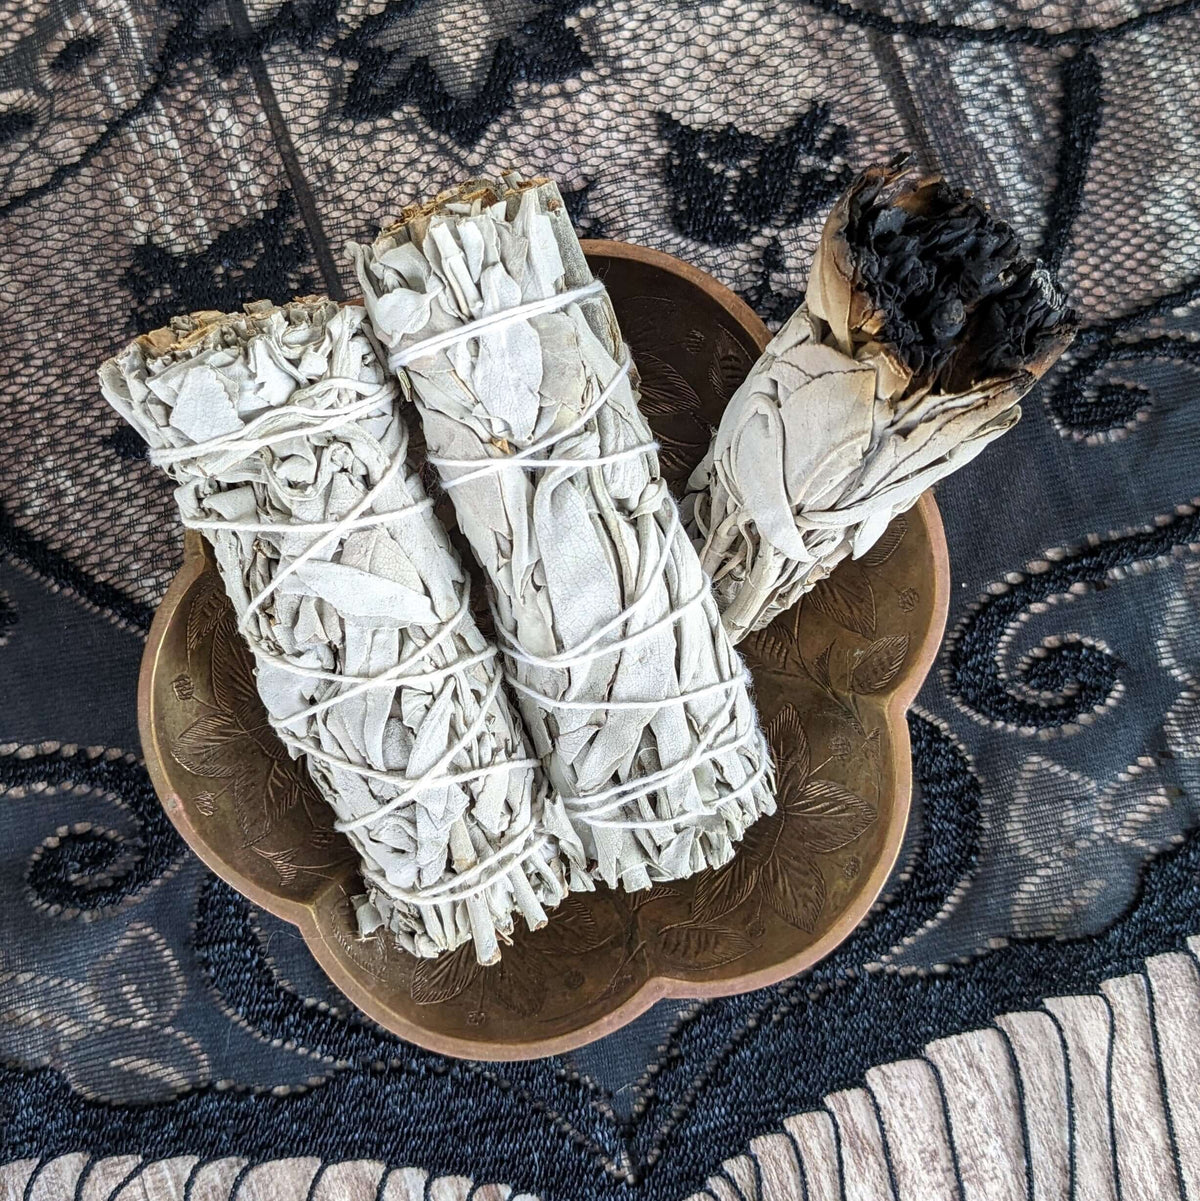 White Sage Bundles, one has been burned